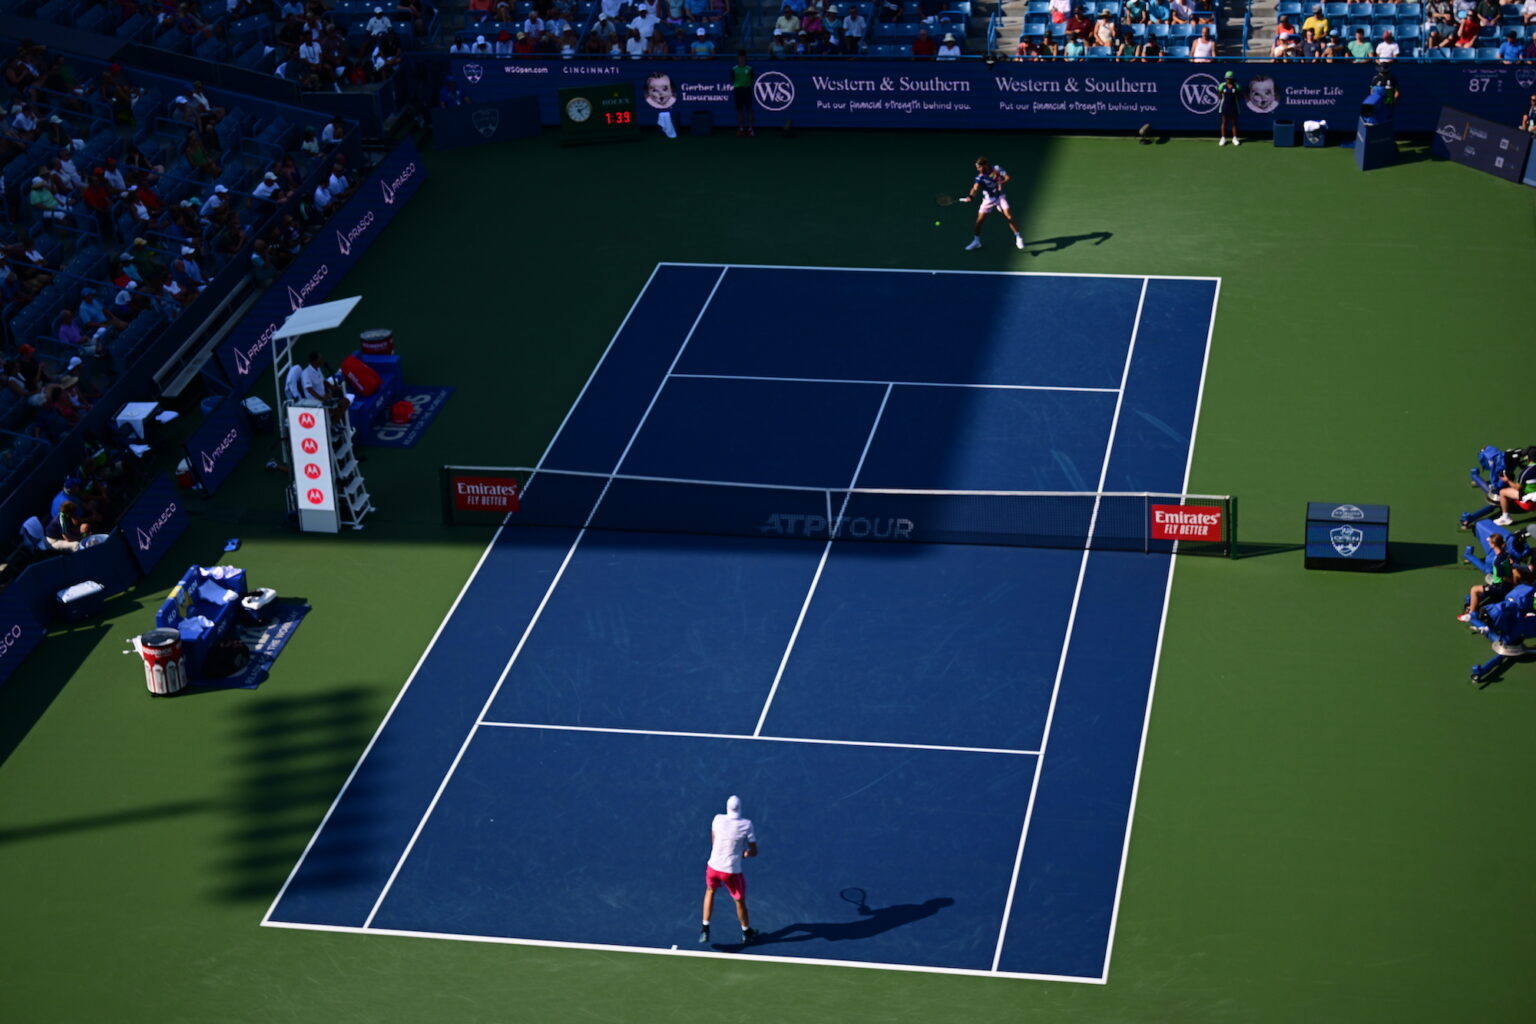 Greenset is the Official Surface of the Western & Southern Open ATP 1000 Cincinnati